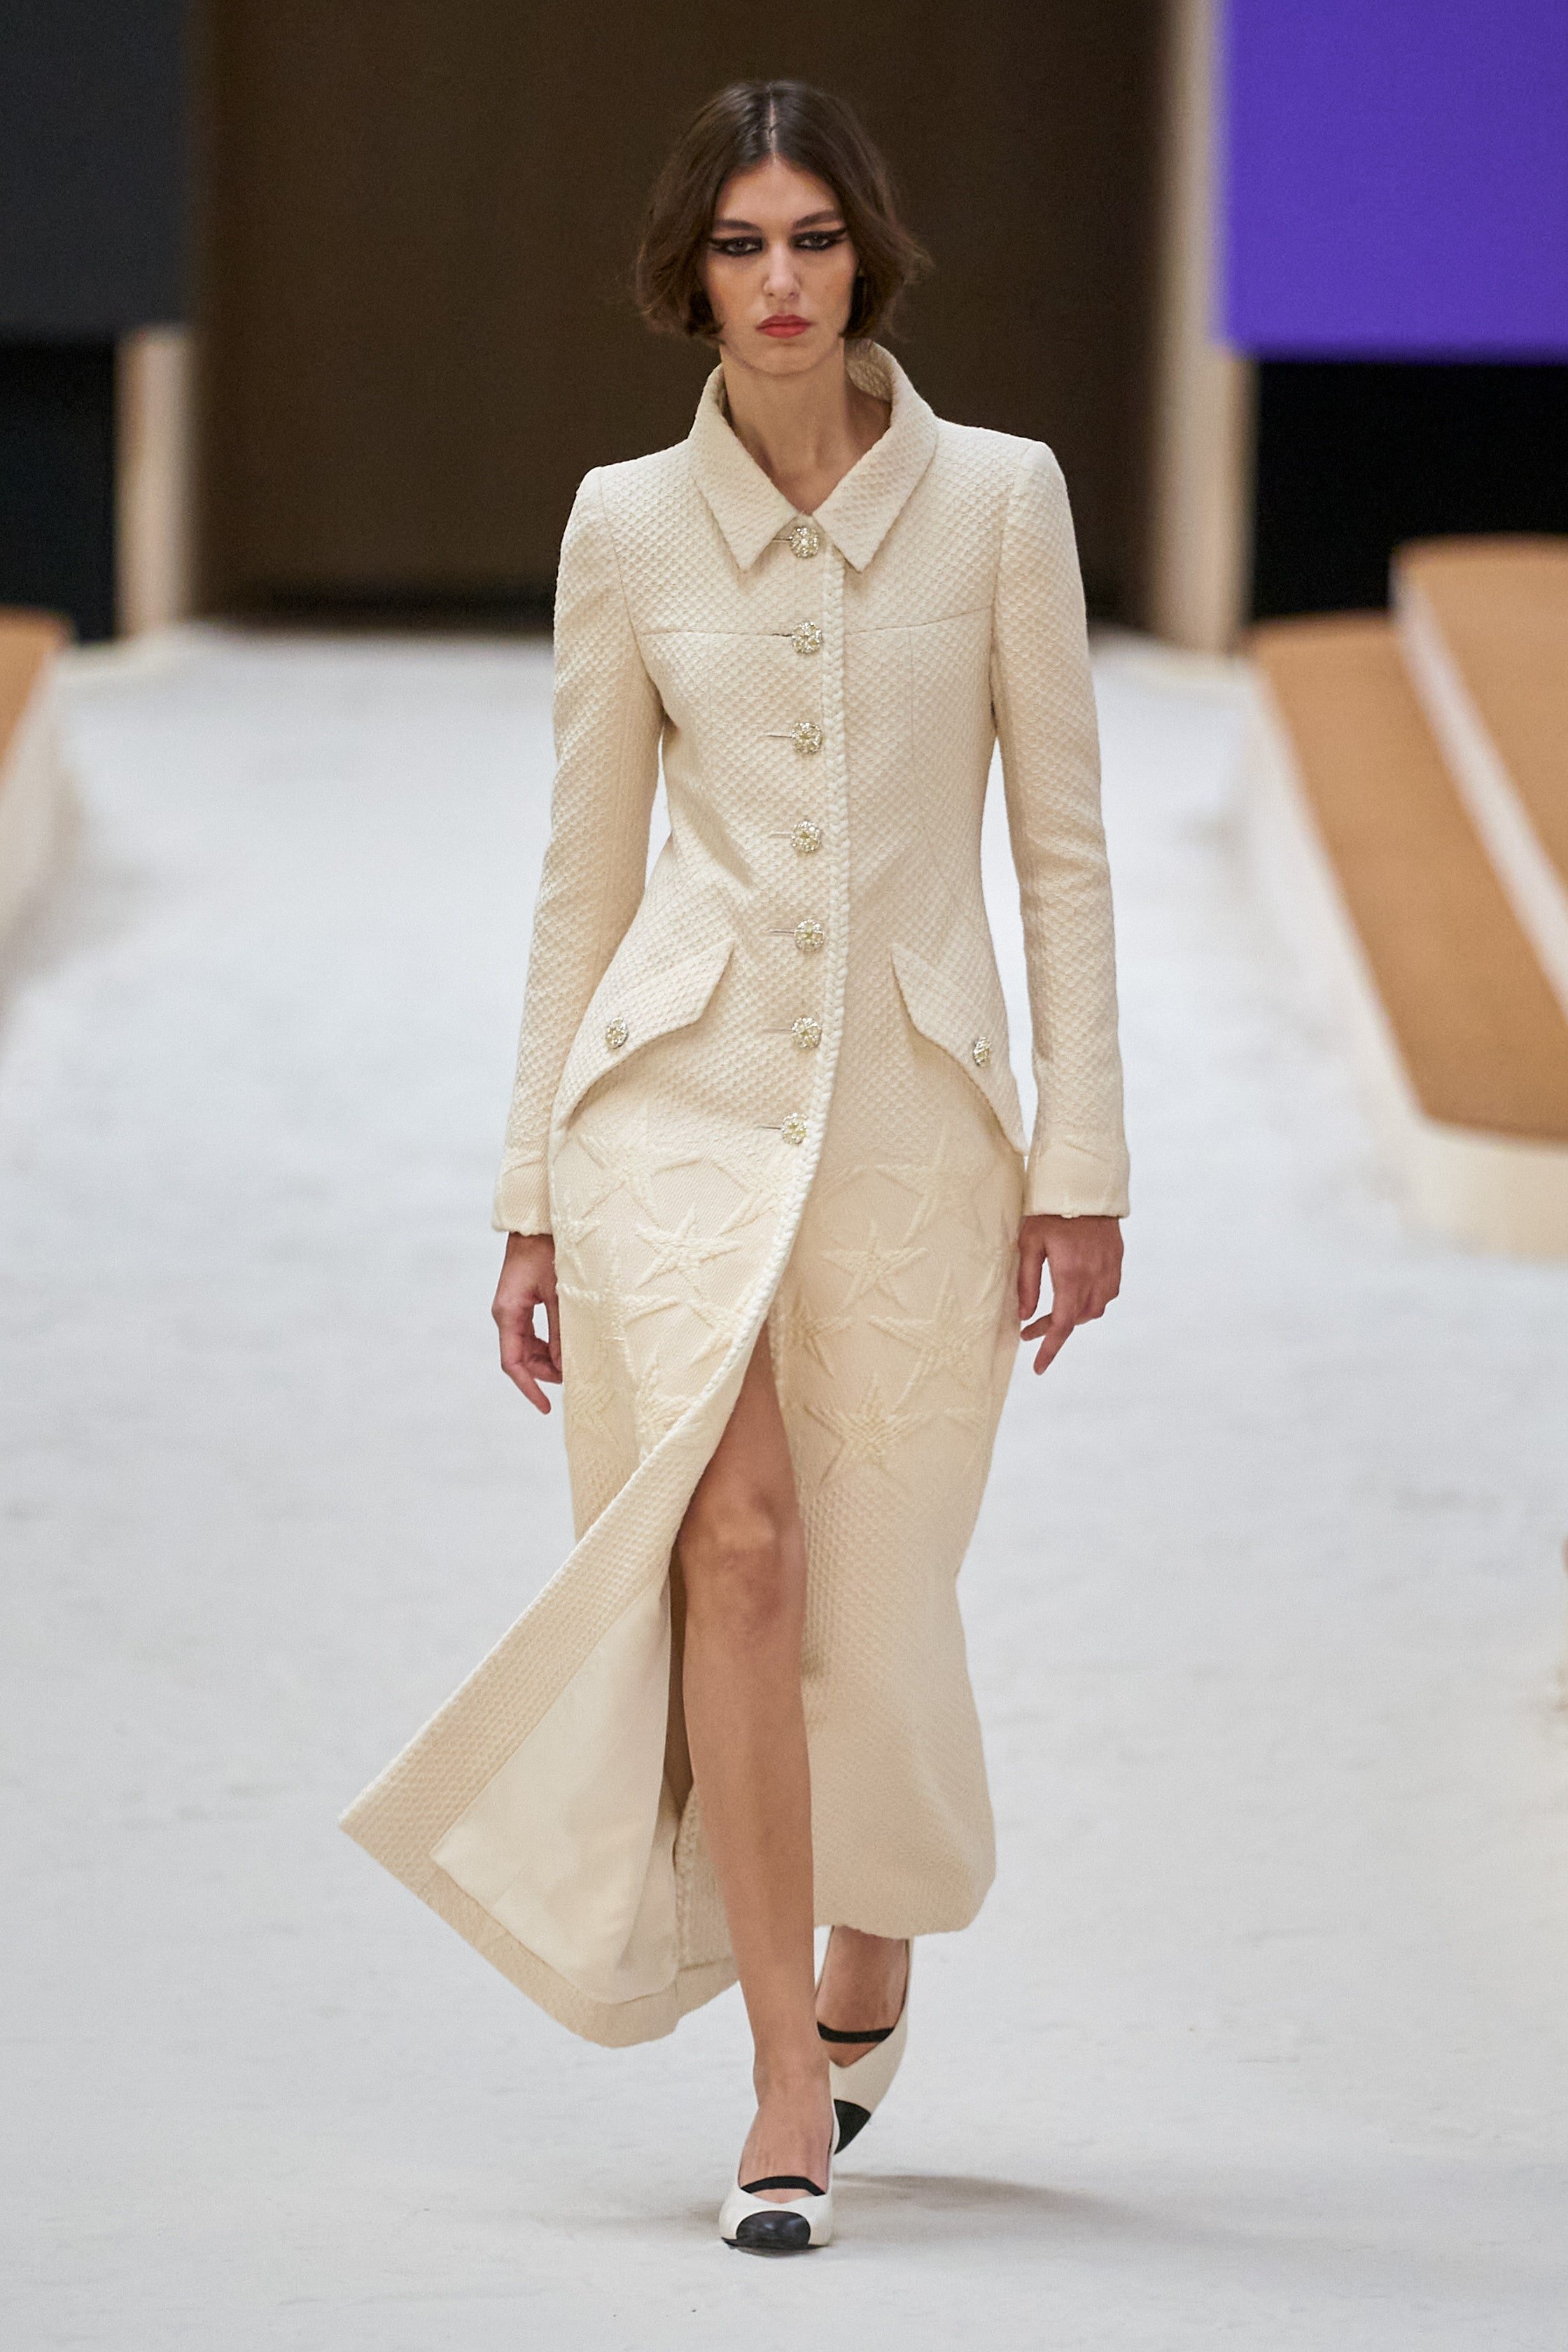 00007-Chanel-Couture-Spring-22-credit-gorunway.jpeg